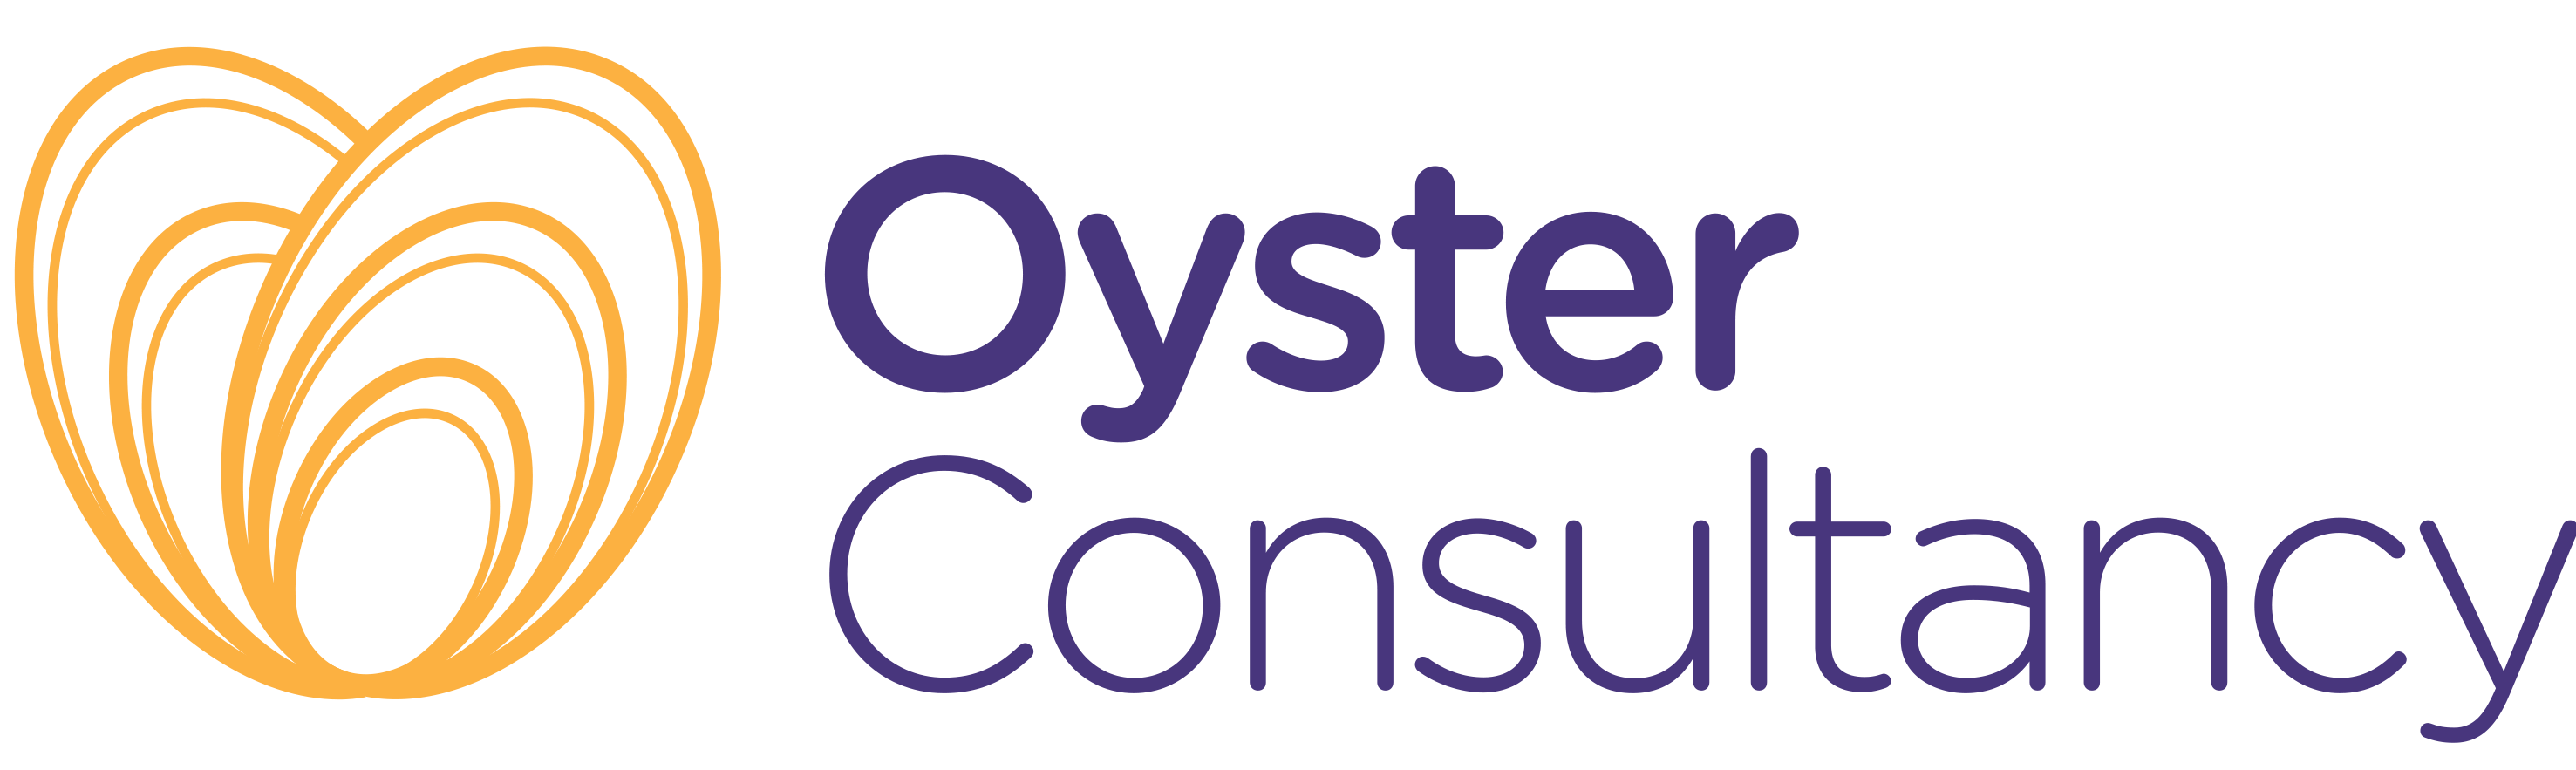 Oyster Consultancy